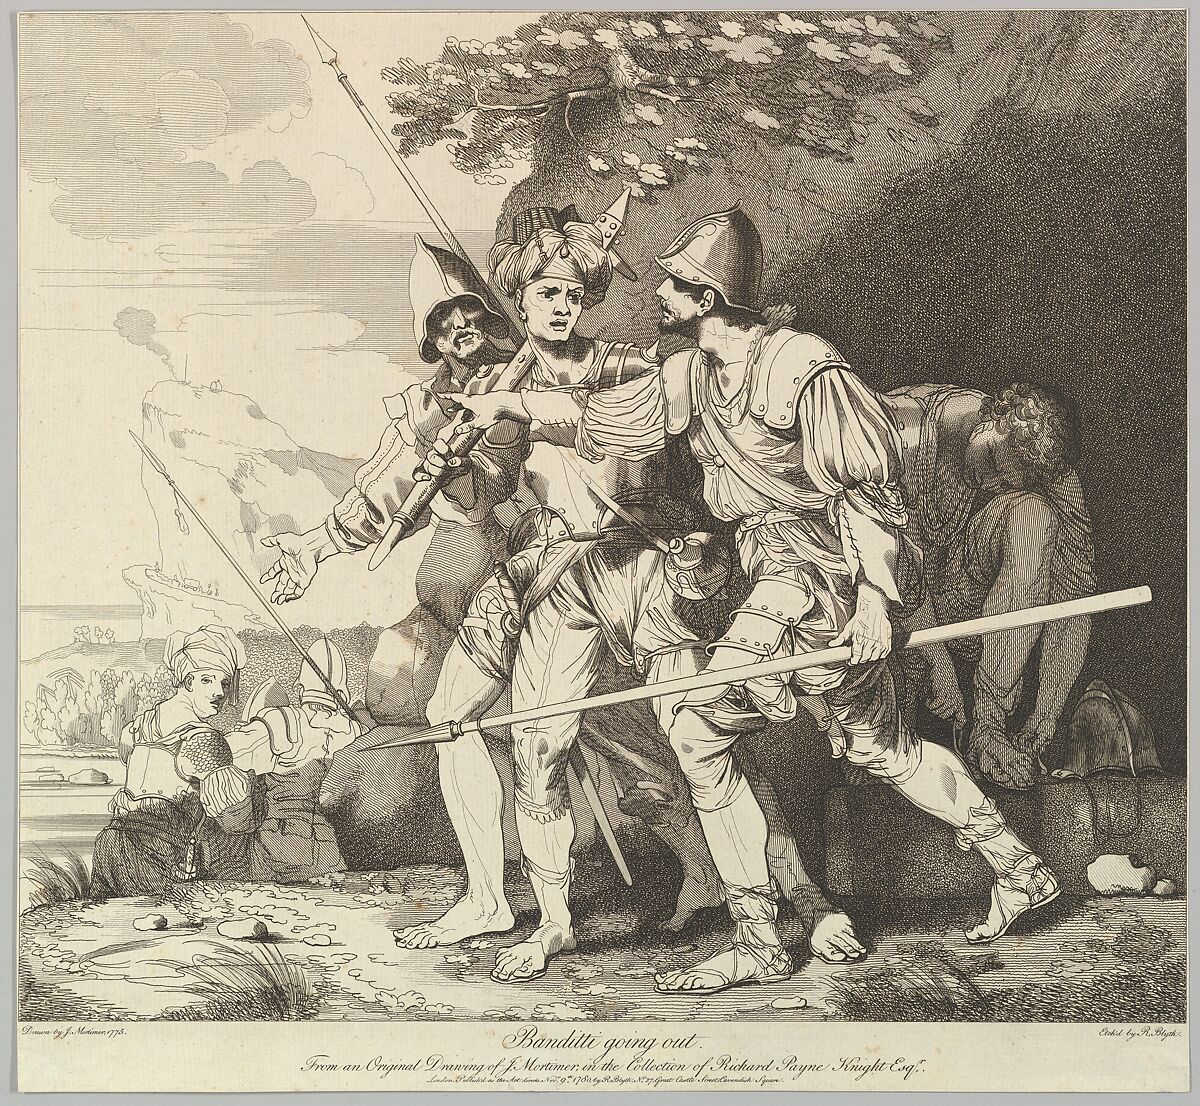 Banditti Going Out, Etched and published by Robert Blyth (British, ca. 1750–1784), Etching 